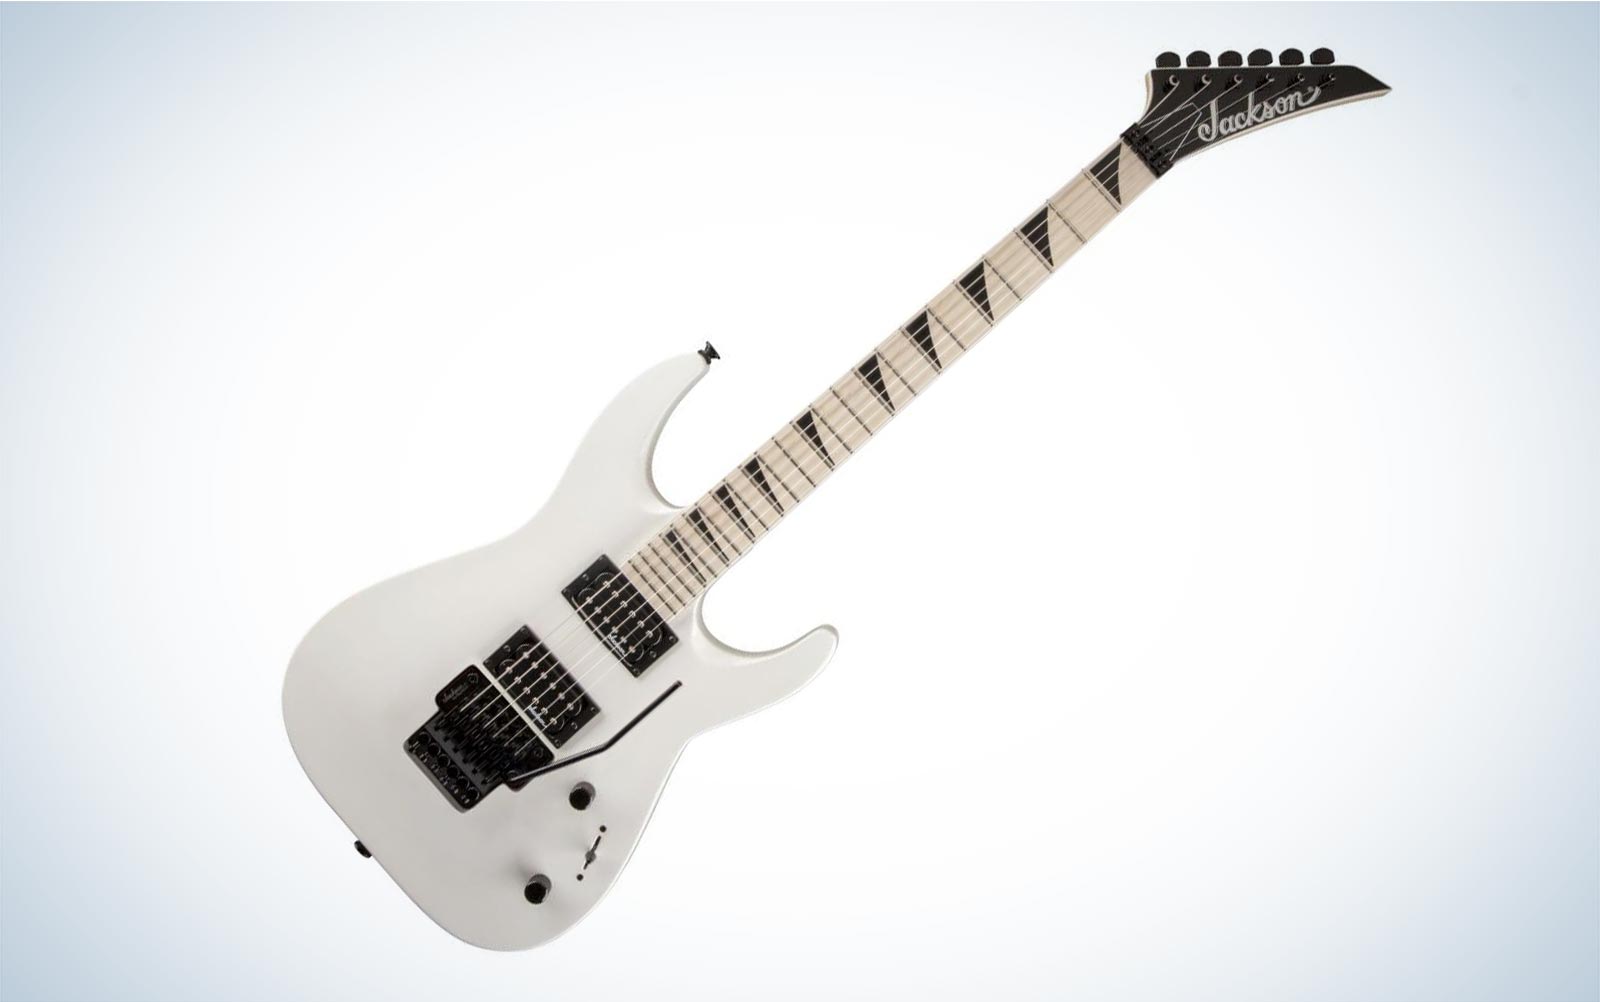 A white Jackson Dinky DKA M electric guitar tilted to the right on a plain background